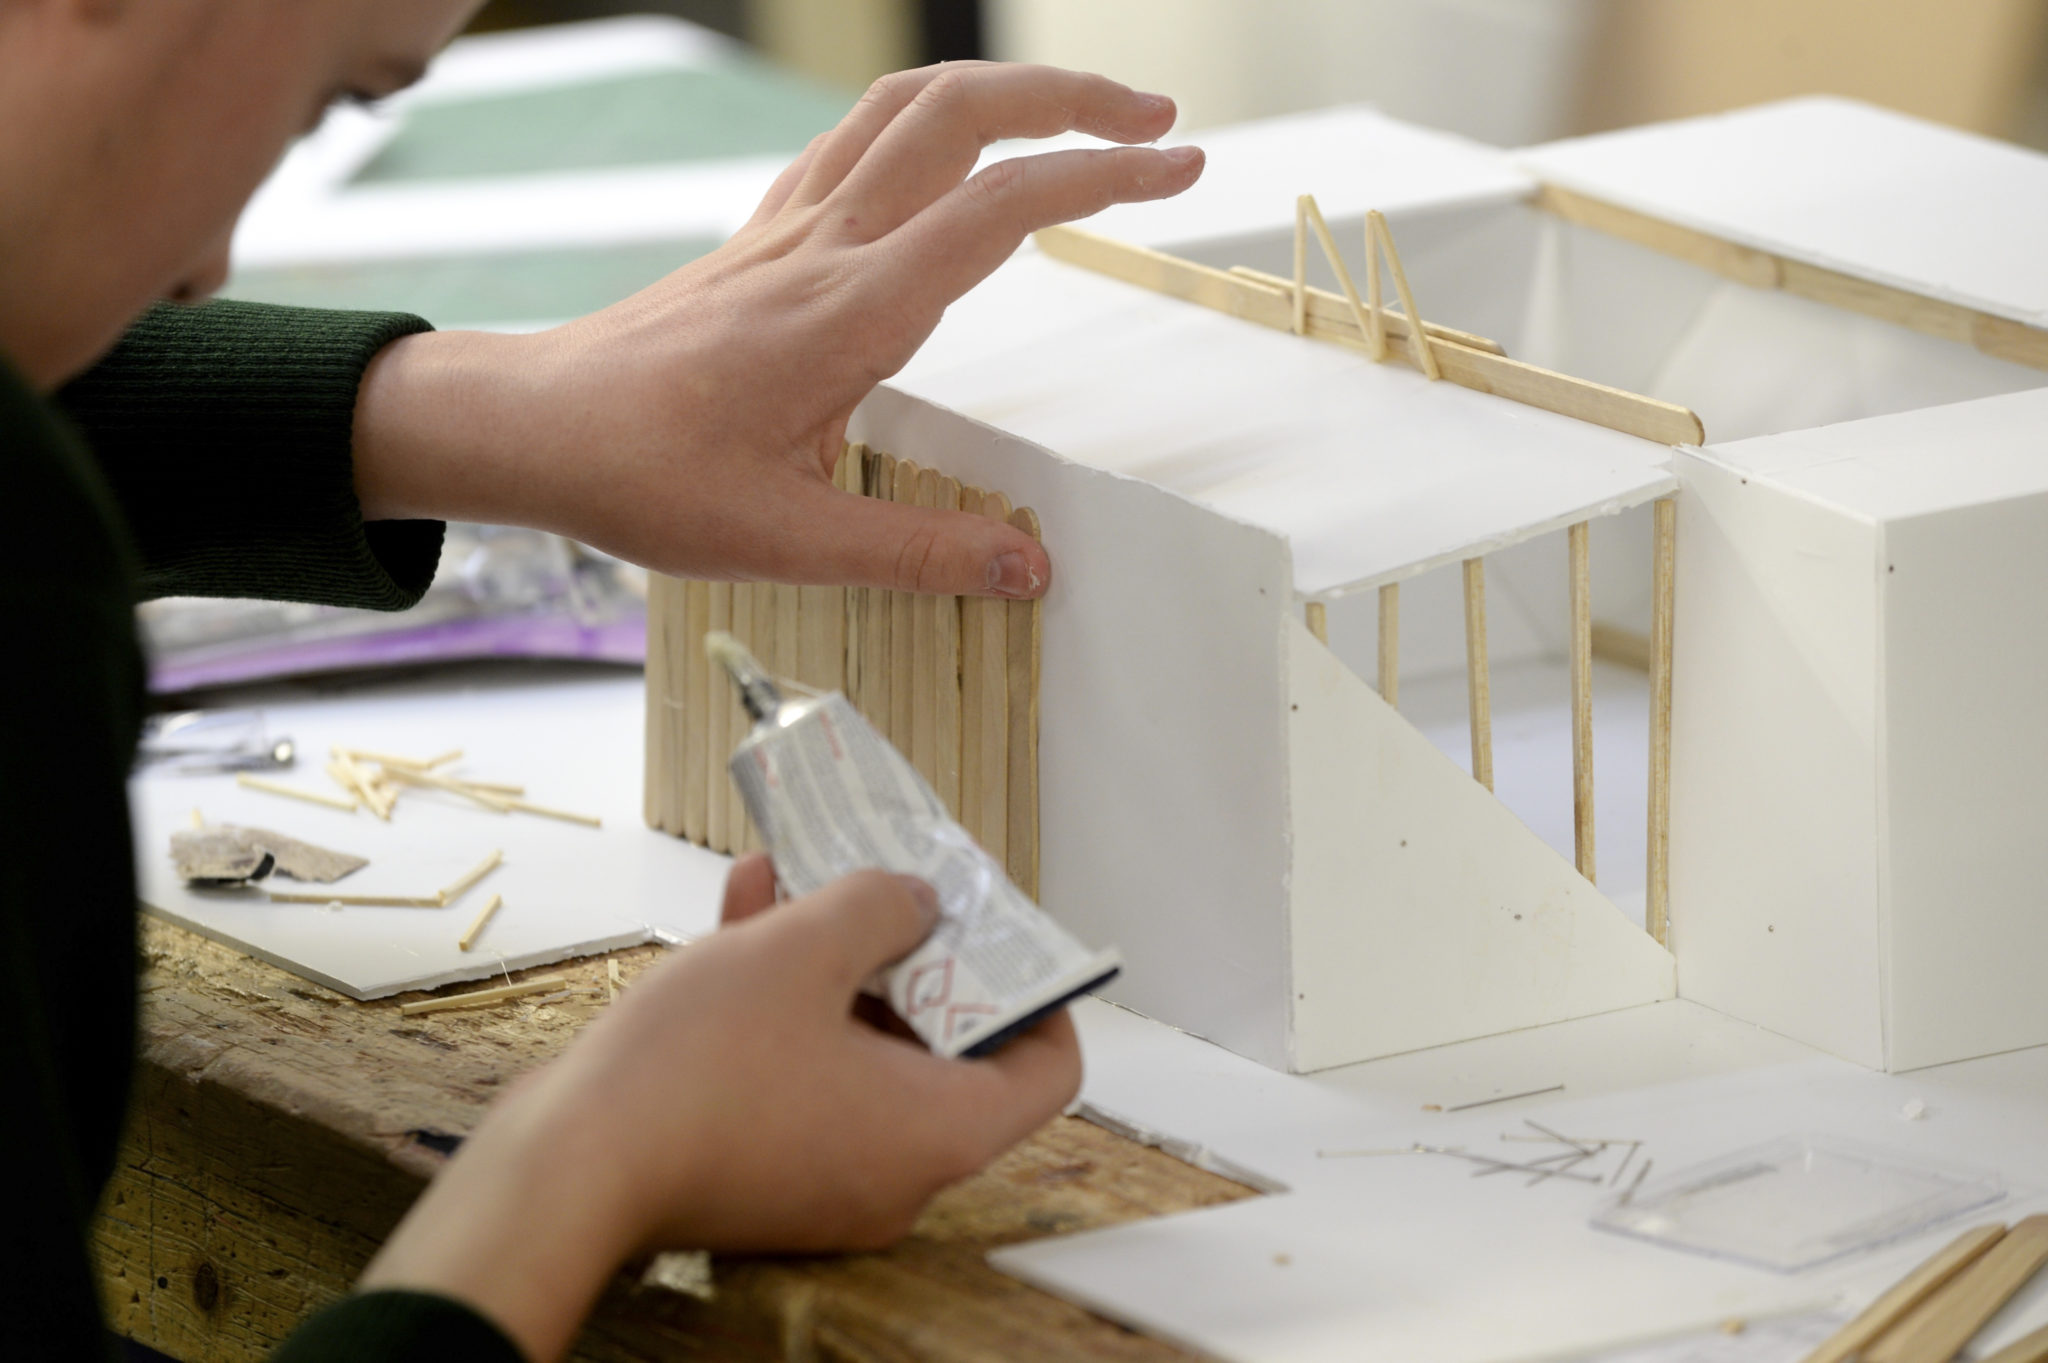 Architects in School: Open Call for Schools 2023/24